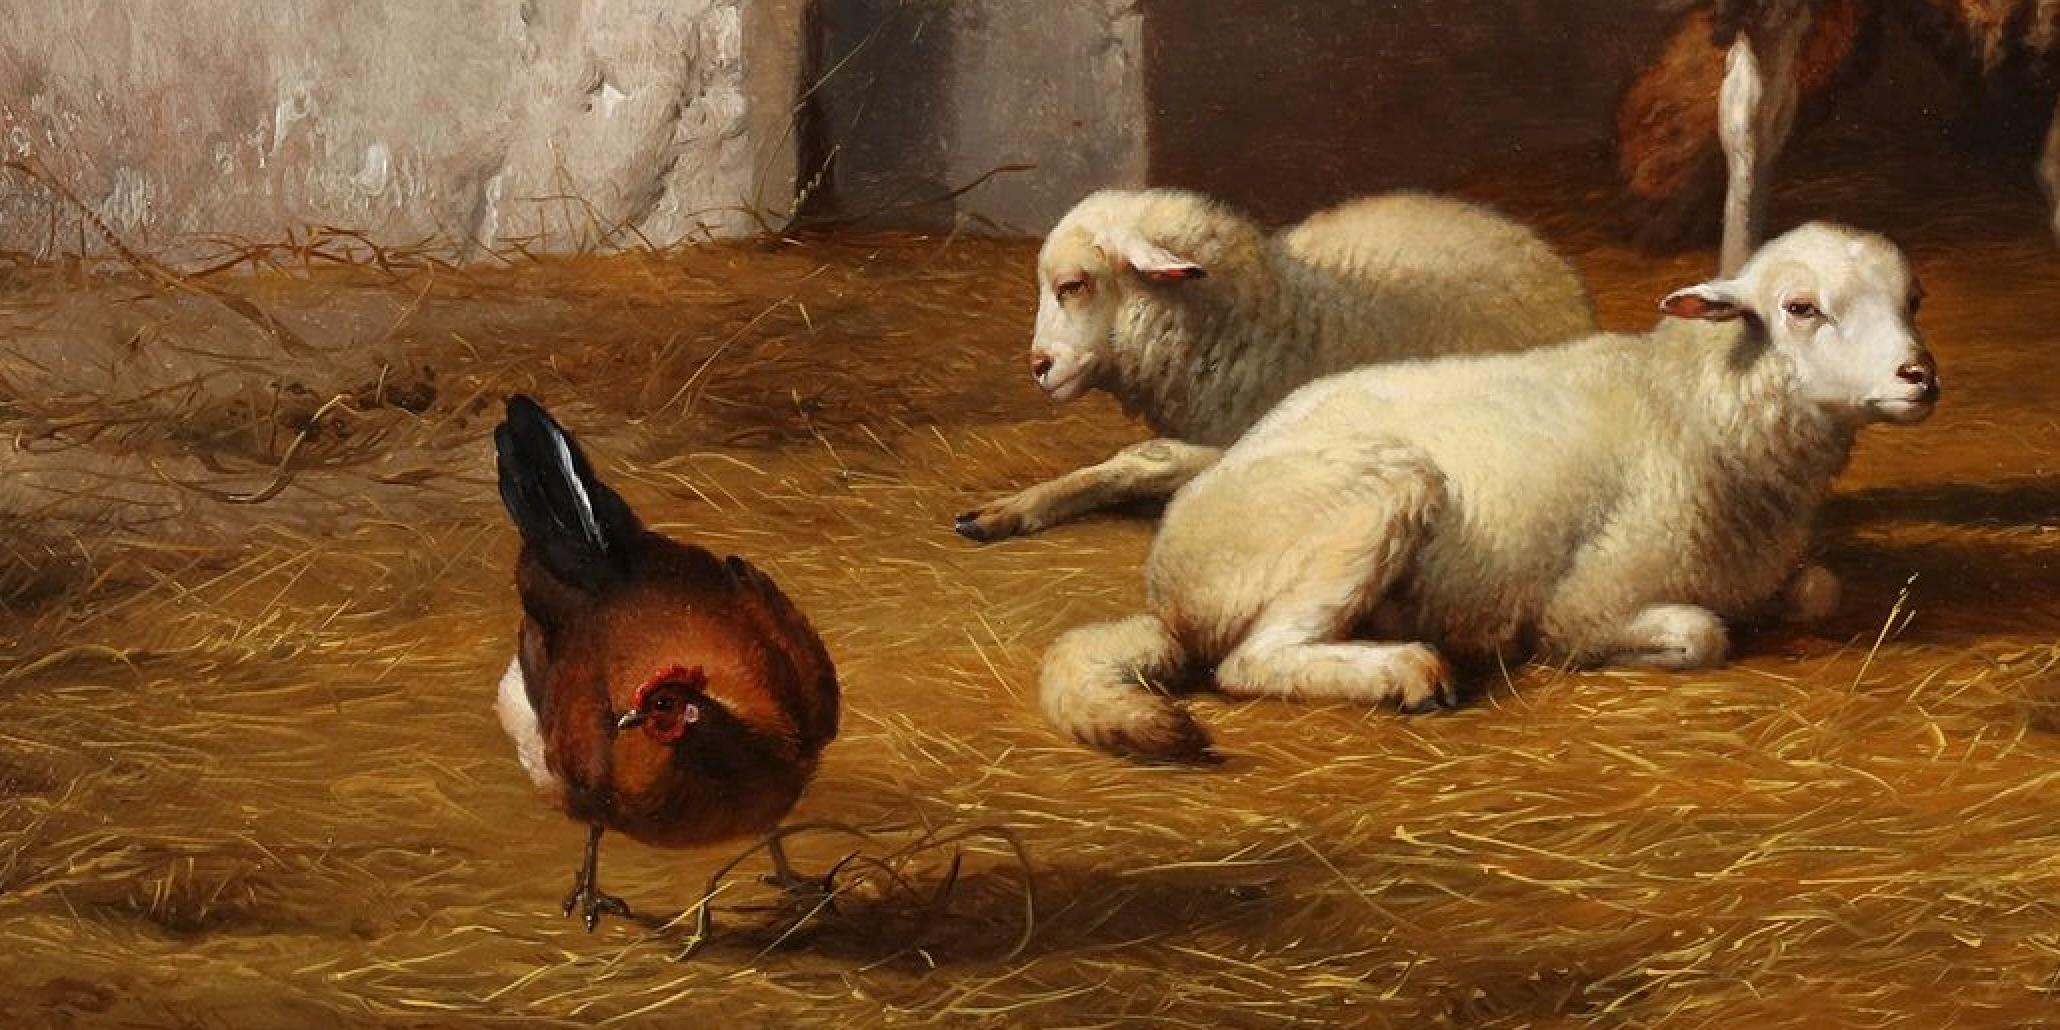 Sheep and a chicken in their stable - Romantic Painting by Eugène Verboeckhoven